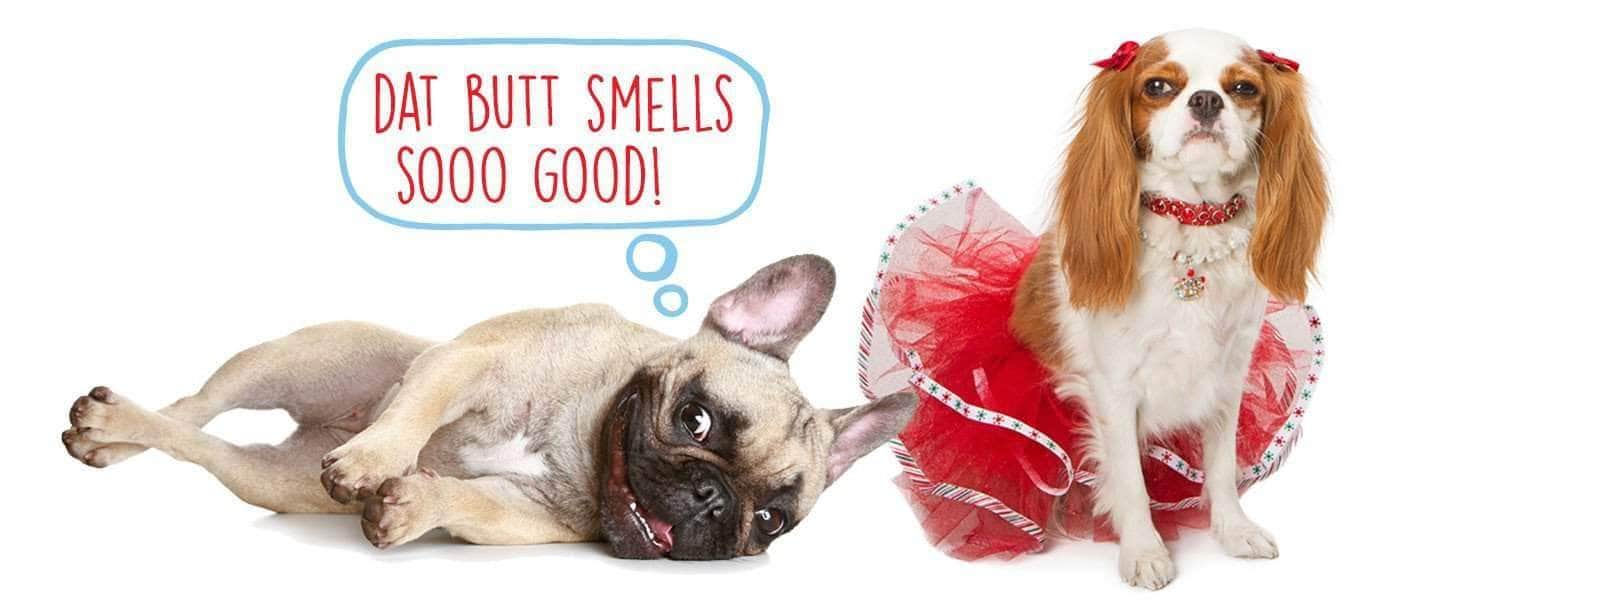 SNIFF IT, SNIFF IT GOOD, SNIFF IT REAL GOOD | WHY DOG'S SNIFF BUTTS